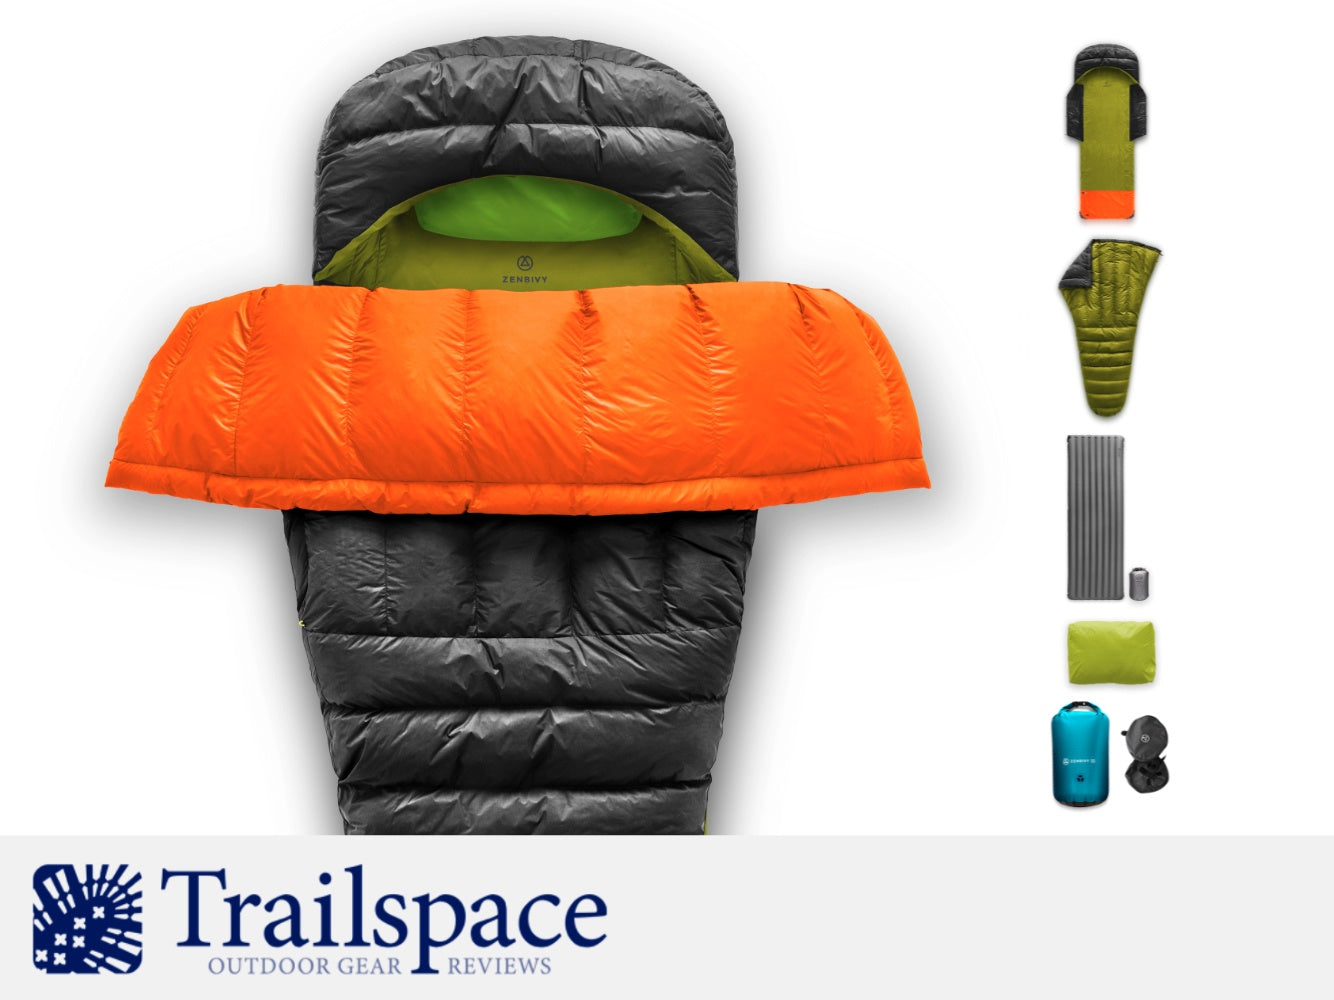 PRESS: Trailspace reviews the Light Bed in depth!